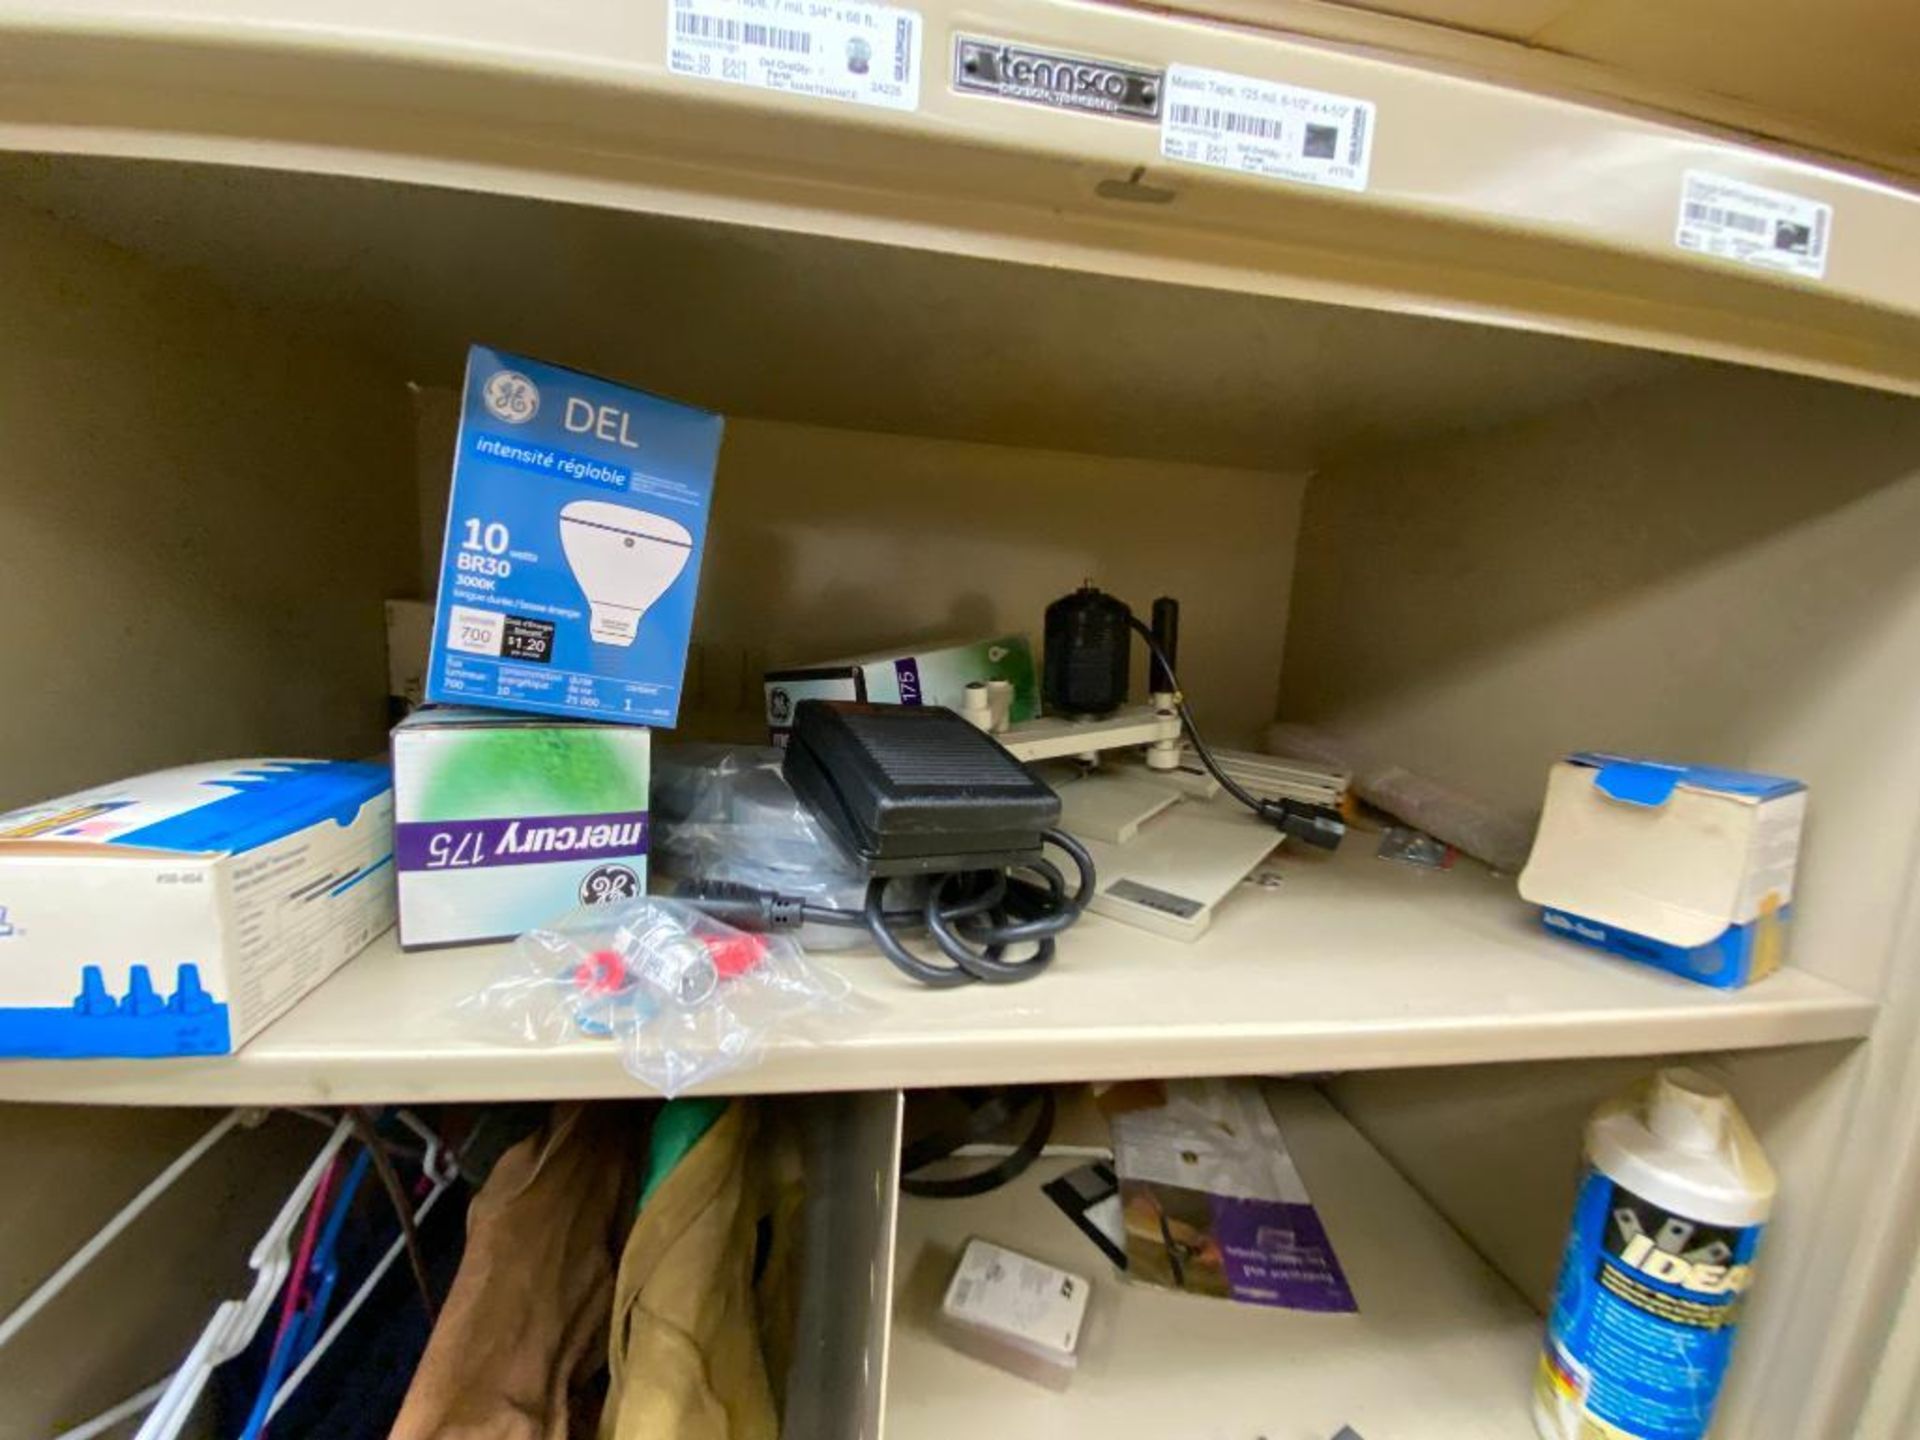 contents of supply room, JustRite flammable storage cabinets, SPX pump, assorted bits, Cryospray, in - Image 20 of 31